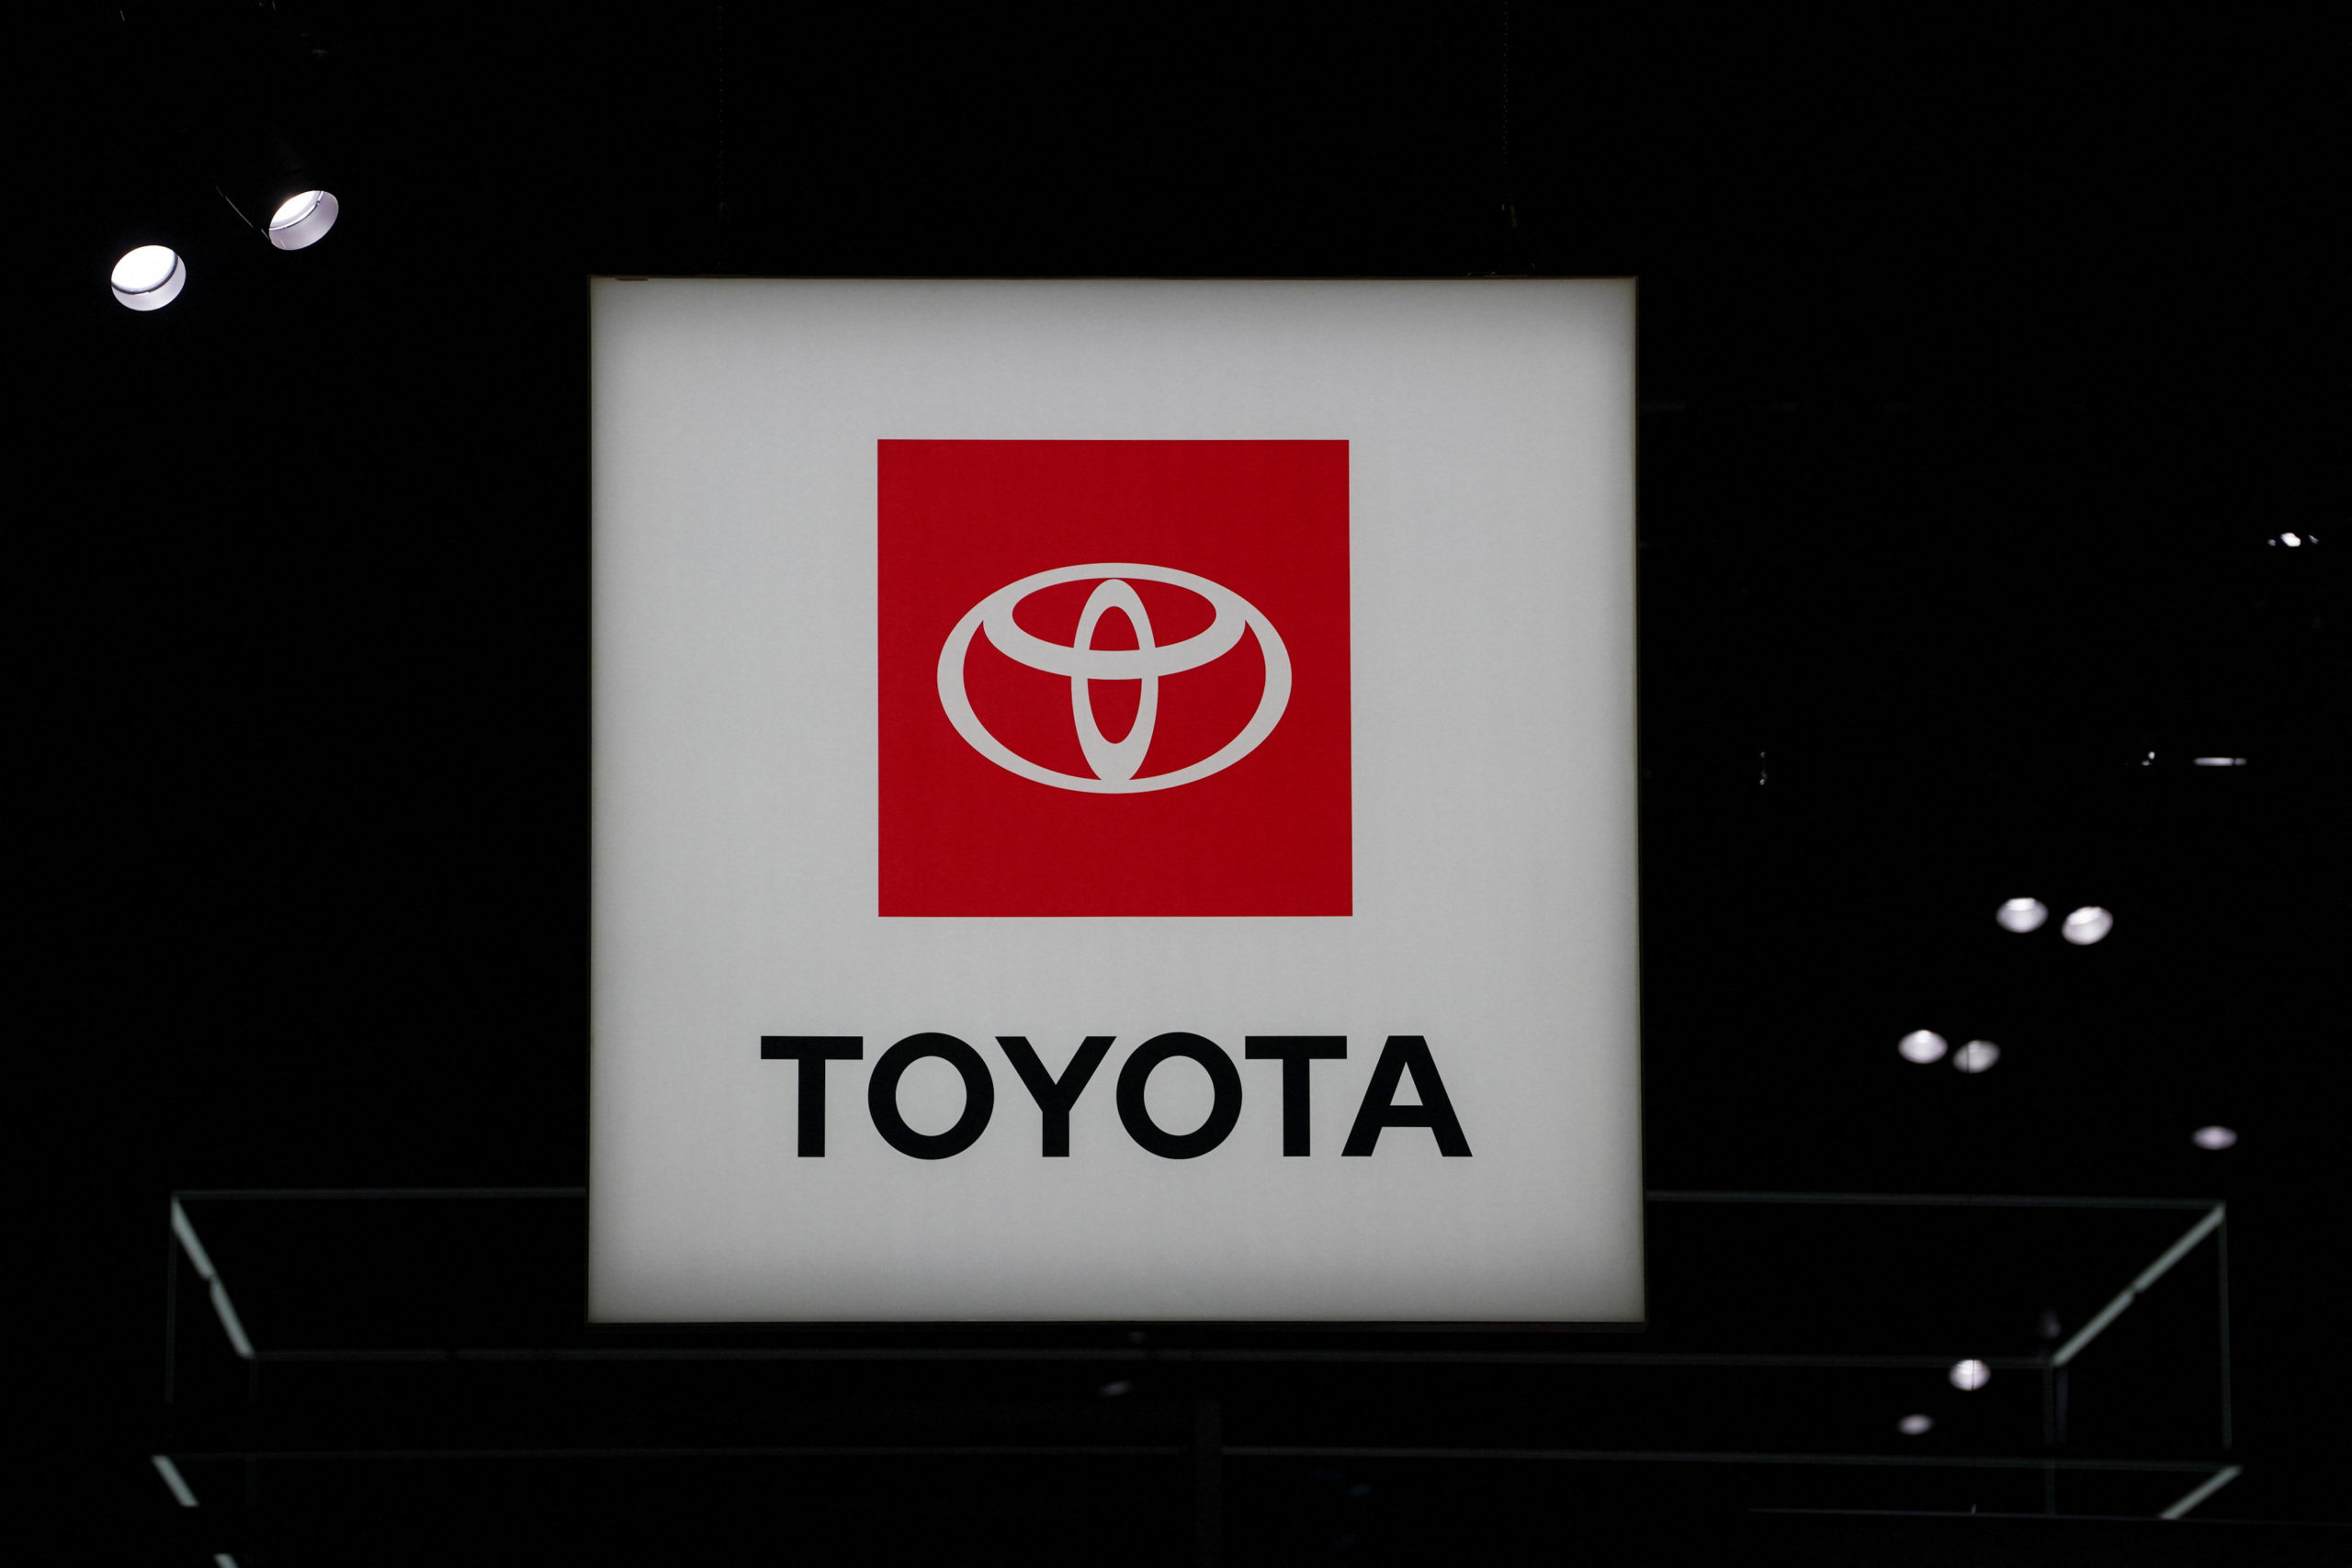 Data breach at Toyota of customers